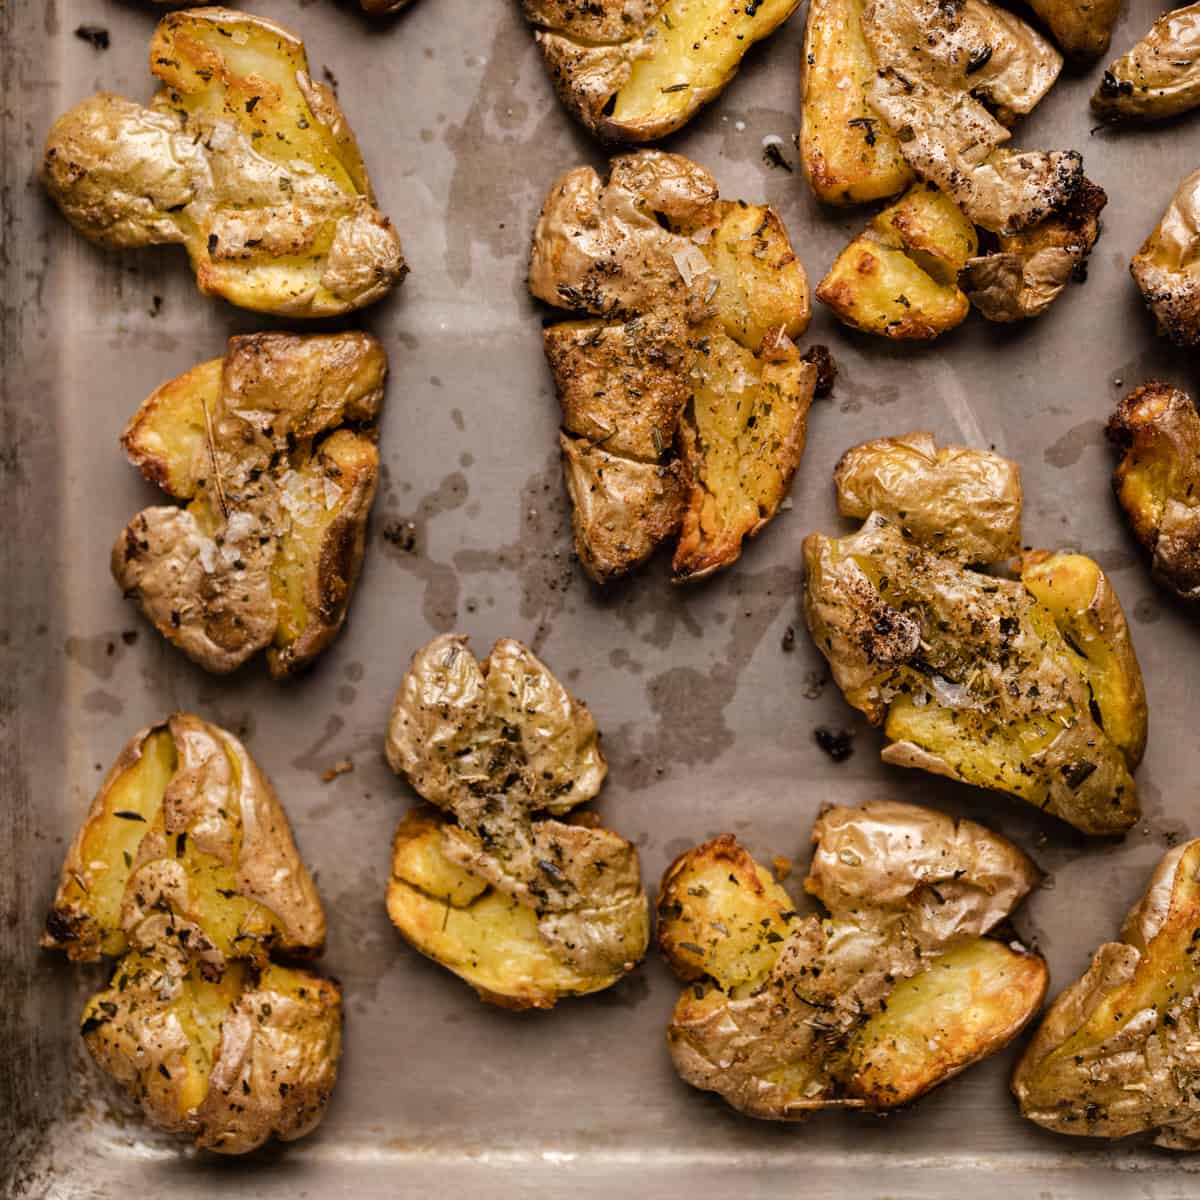 Golden brown smashed fingerling potatoes on a cookie sheet.